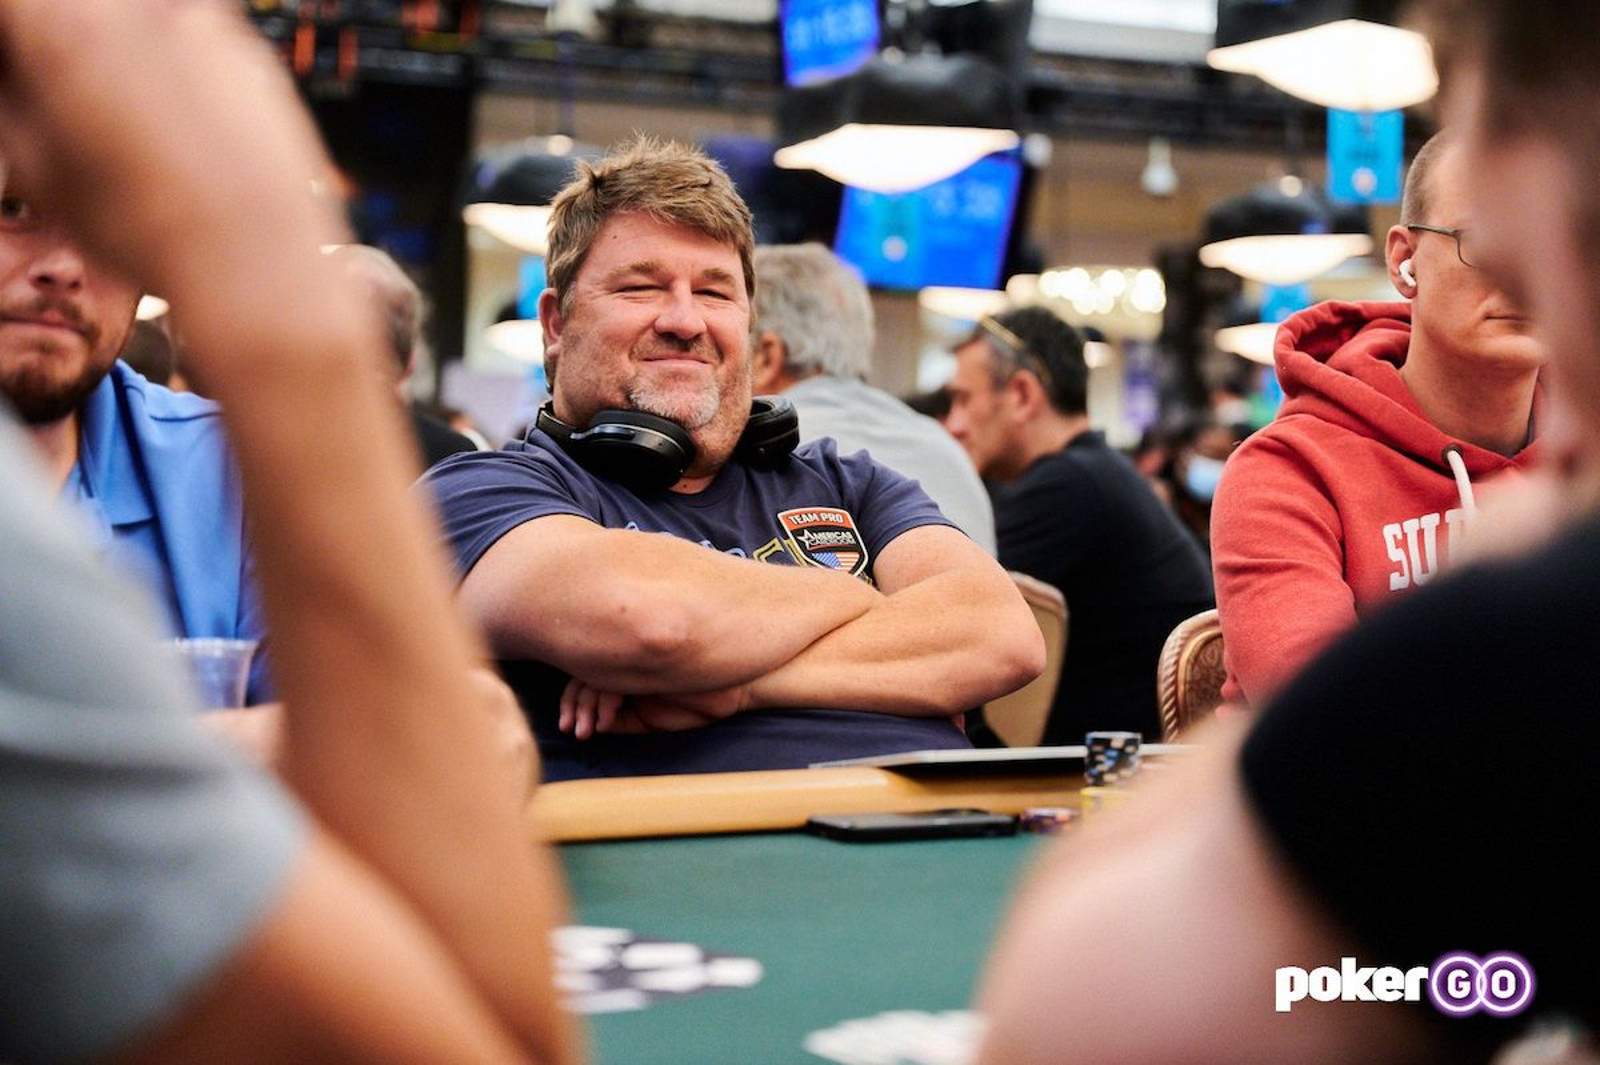 WSOP Day 39 Recap: Bryn Kenney and David Peters Both Star on Day 2d of WSOP Main Event, Three Other Events in Progress   